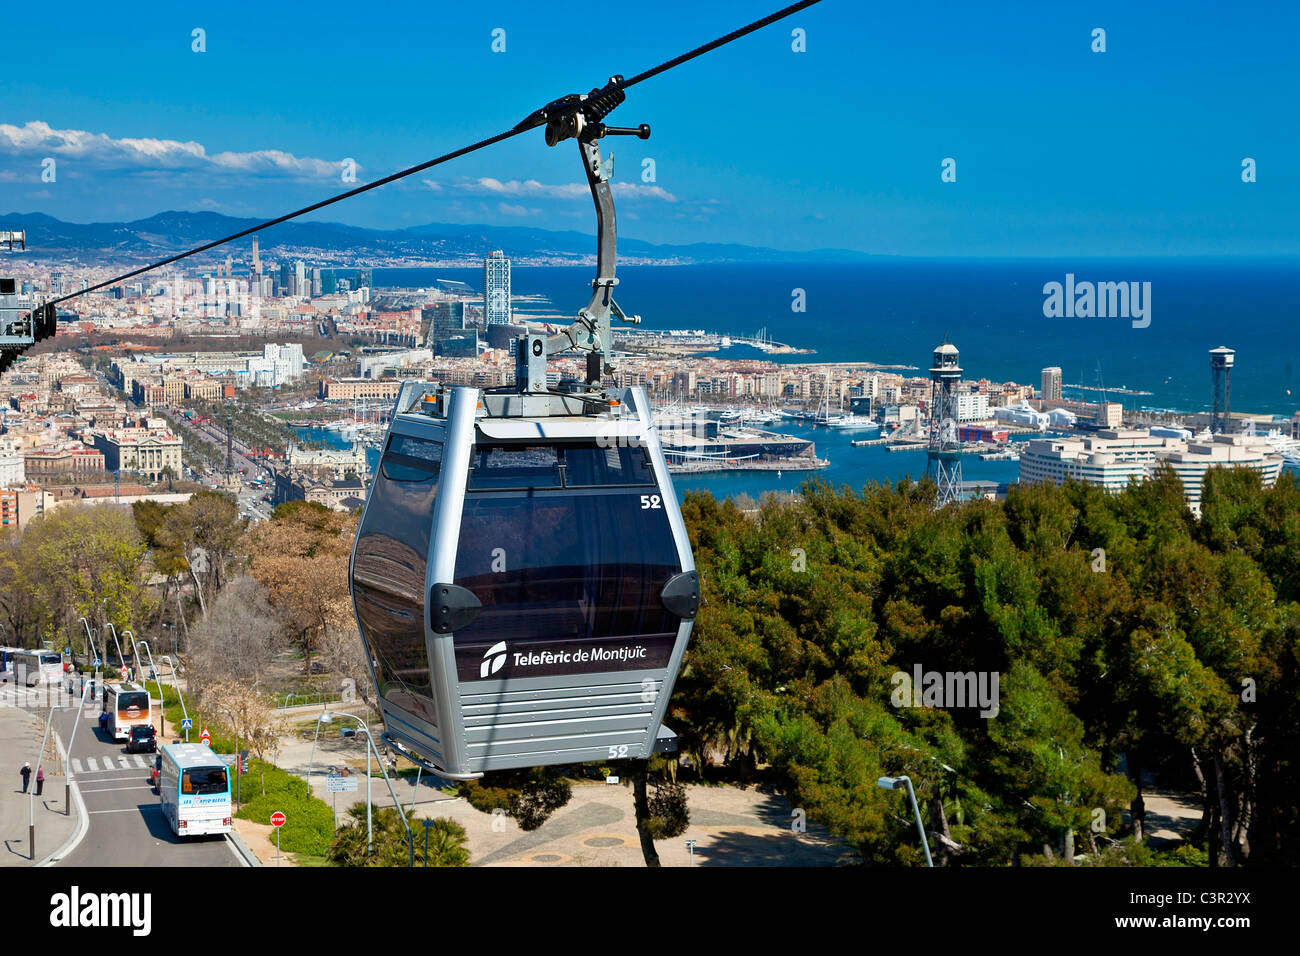 Aerial cable cars take passengers from the top of Montjuic to the city of Barcelona below. Stock Photo